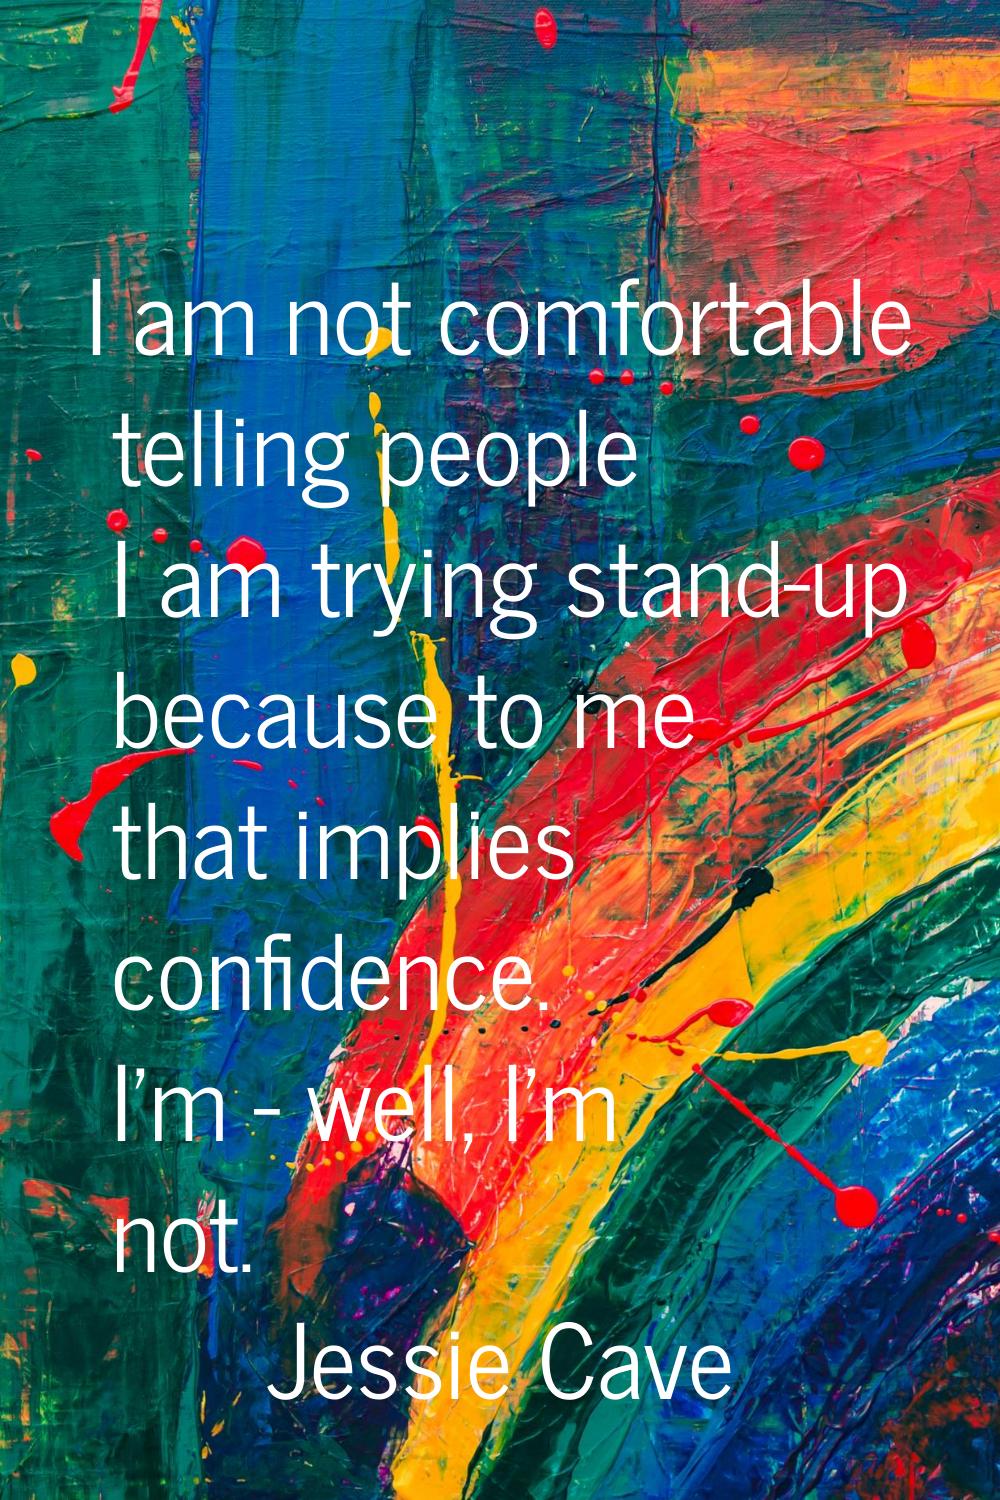 I am not comfortable telling people I am trying stand-up because to me that implies confidence. I'm